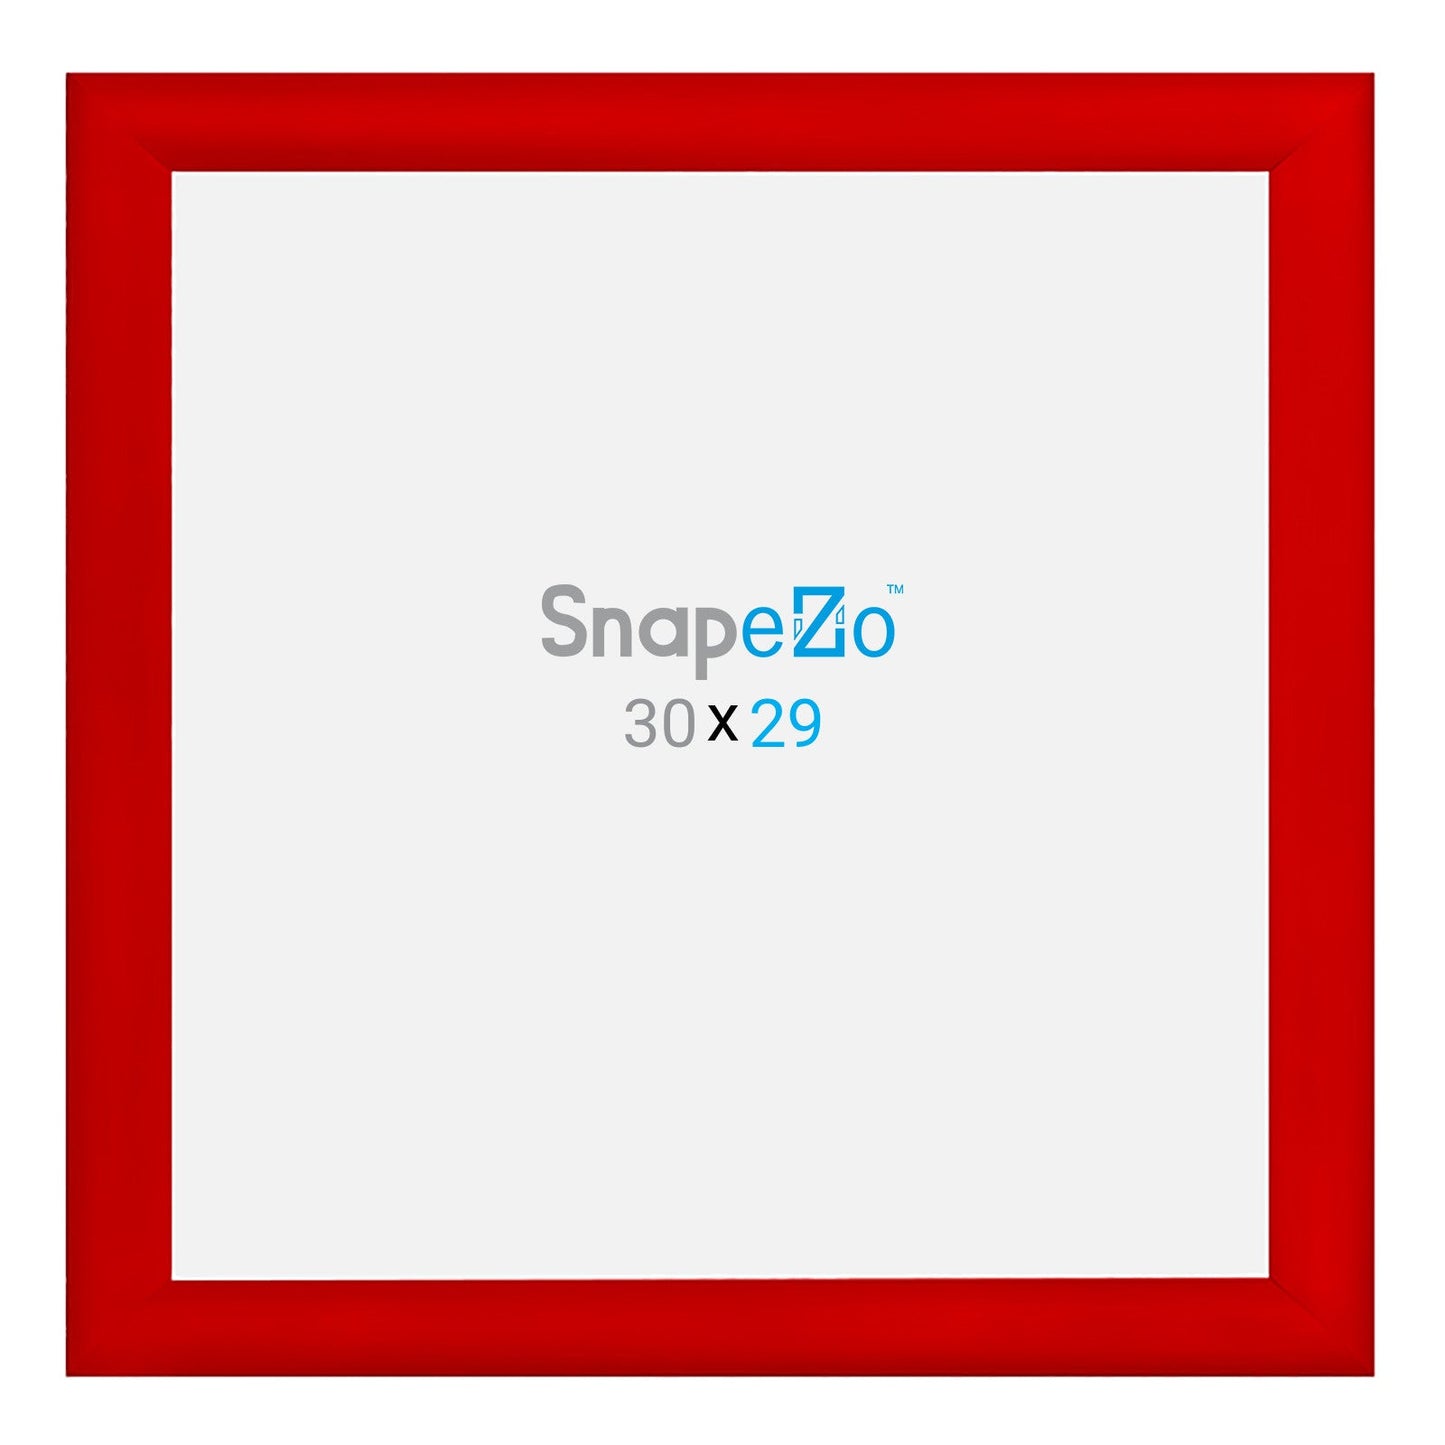 29x30 Red SnapeZo® Snap Frame - 1.2" Profile